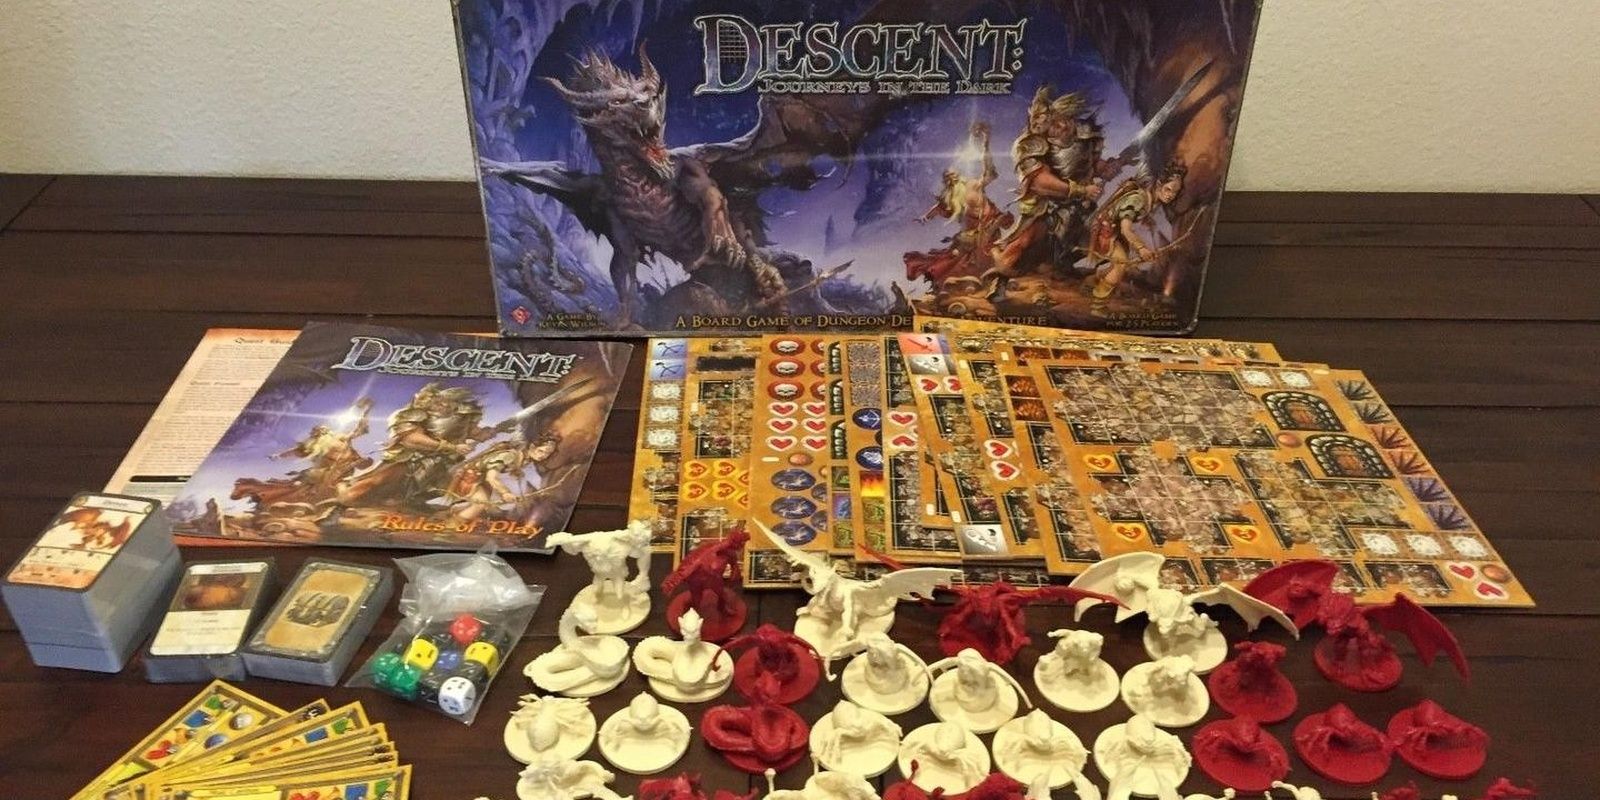 The components and box for Descent: Journeys in the Dark fantasy board game.